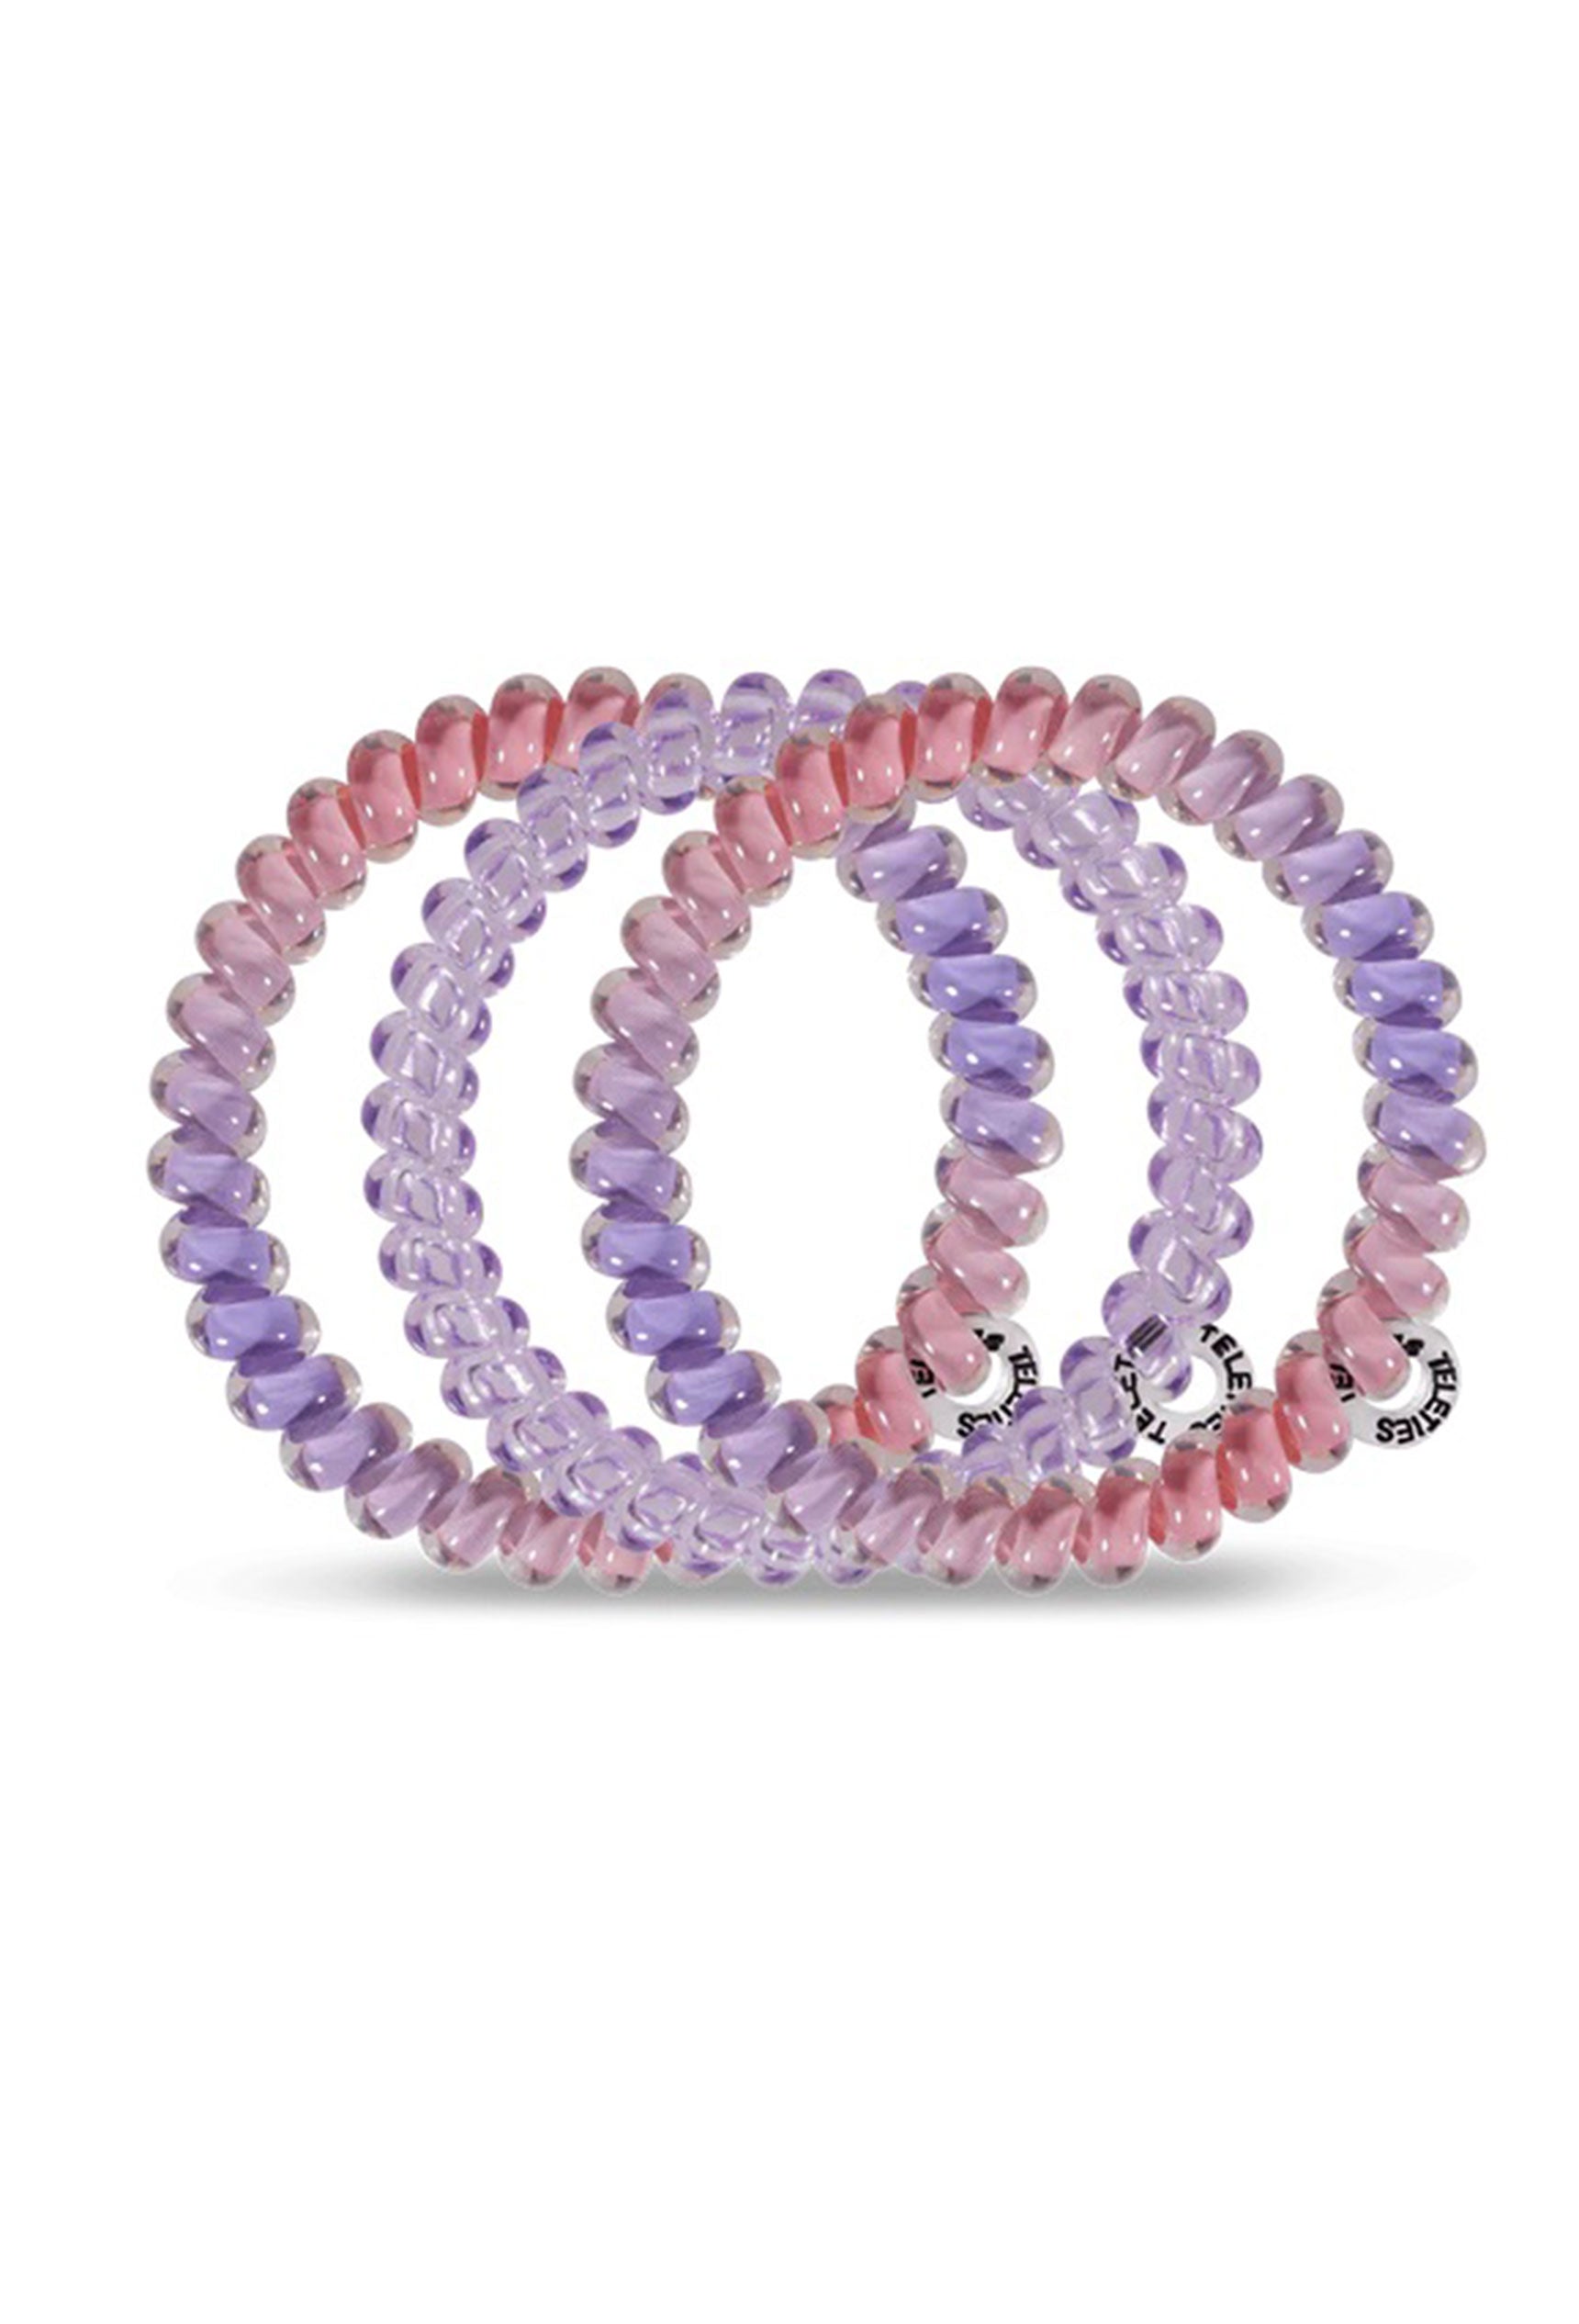 TELETIES Small Hair Ties - Cotton Candy Sky, set of three hair coils, purple and pink